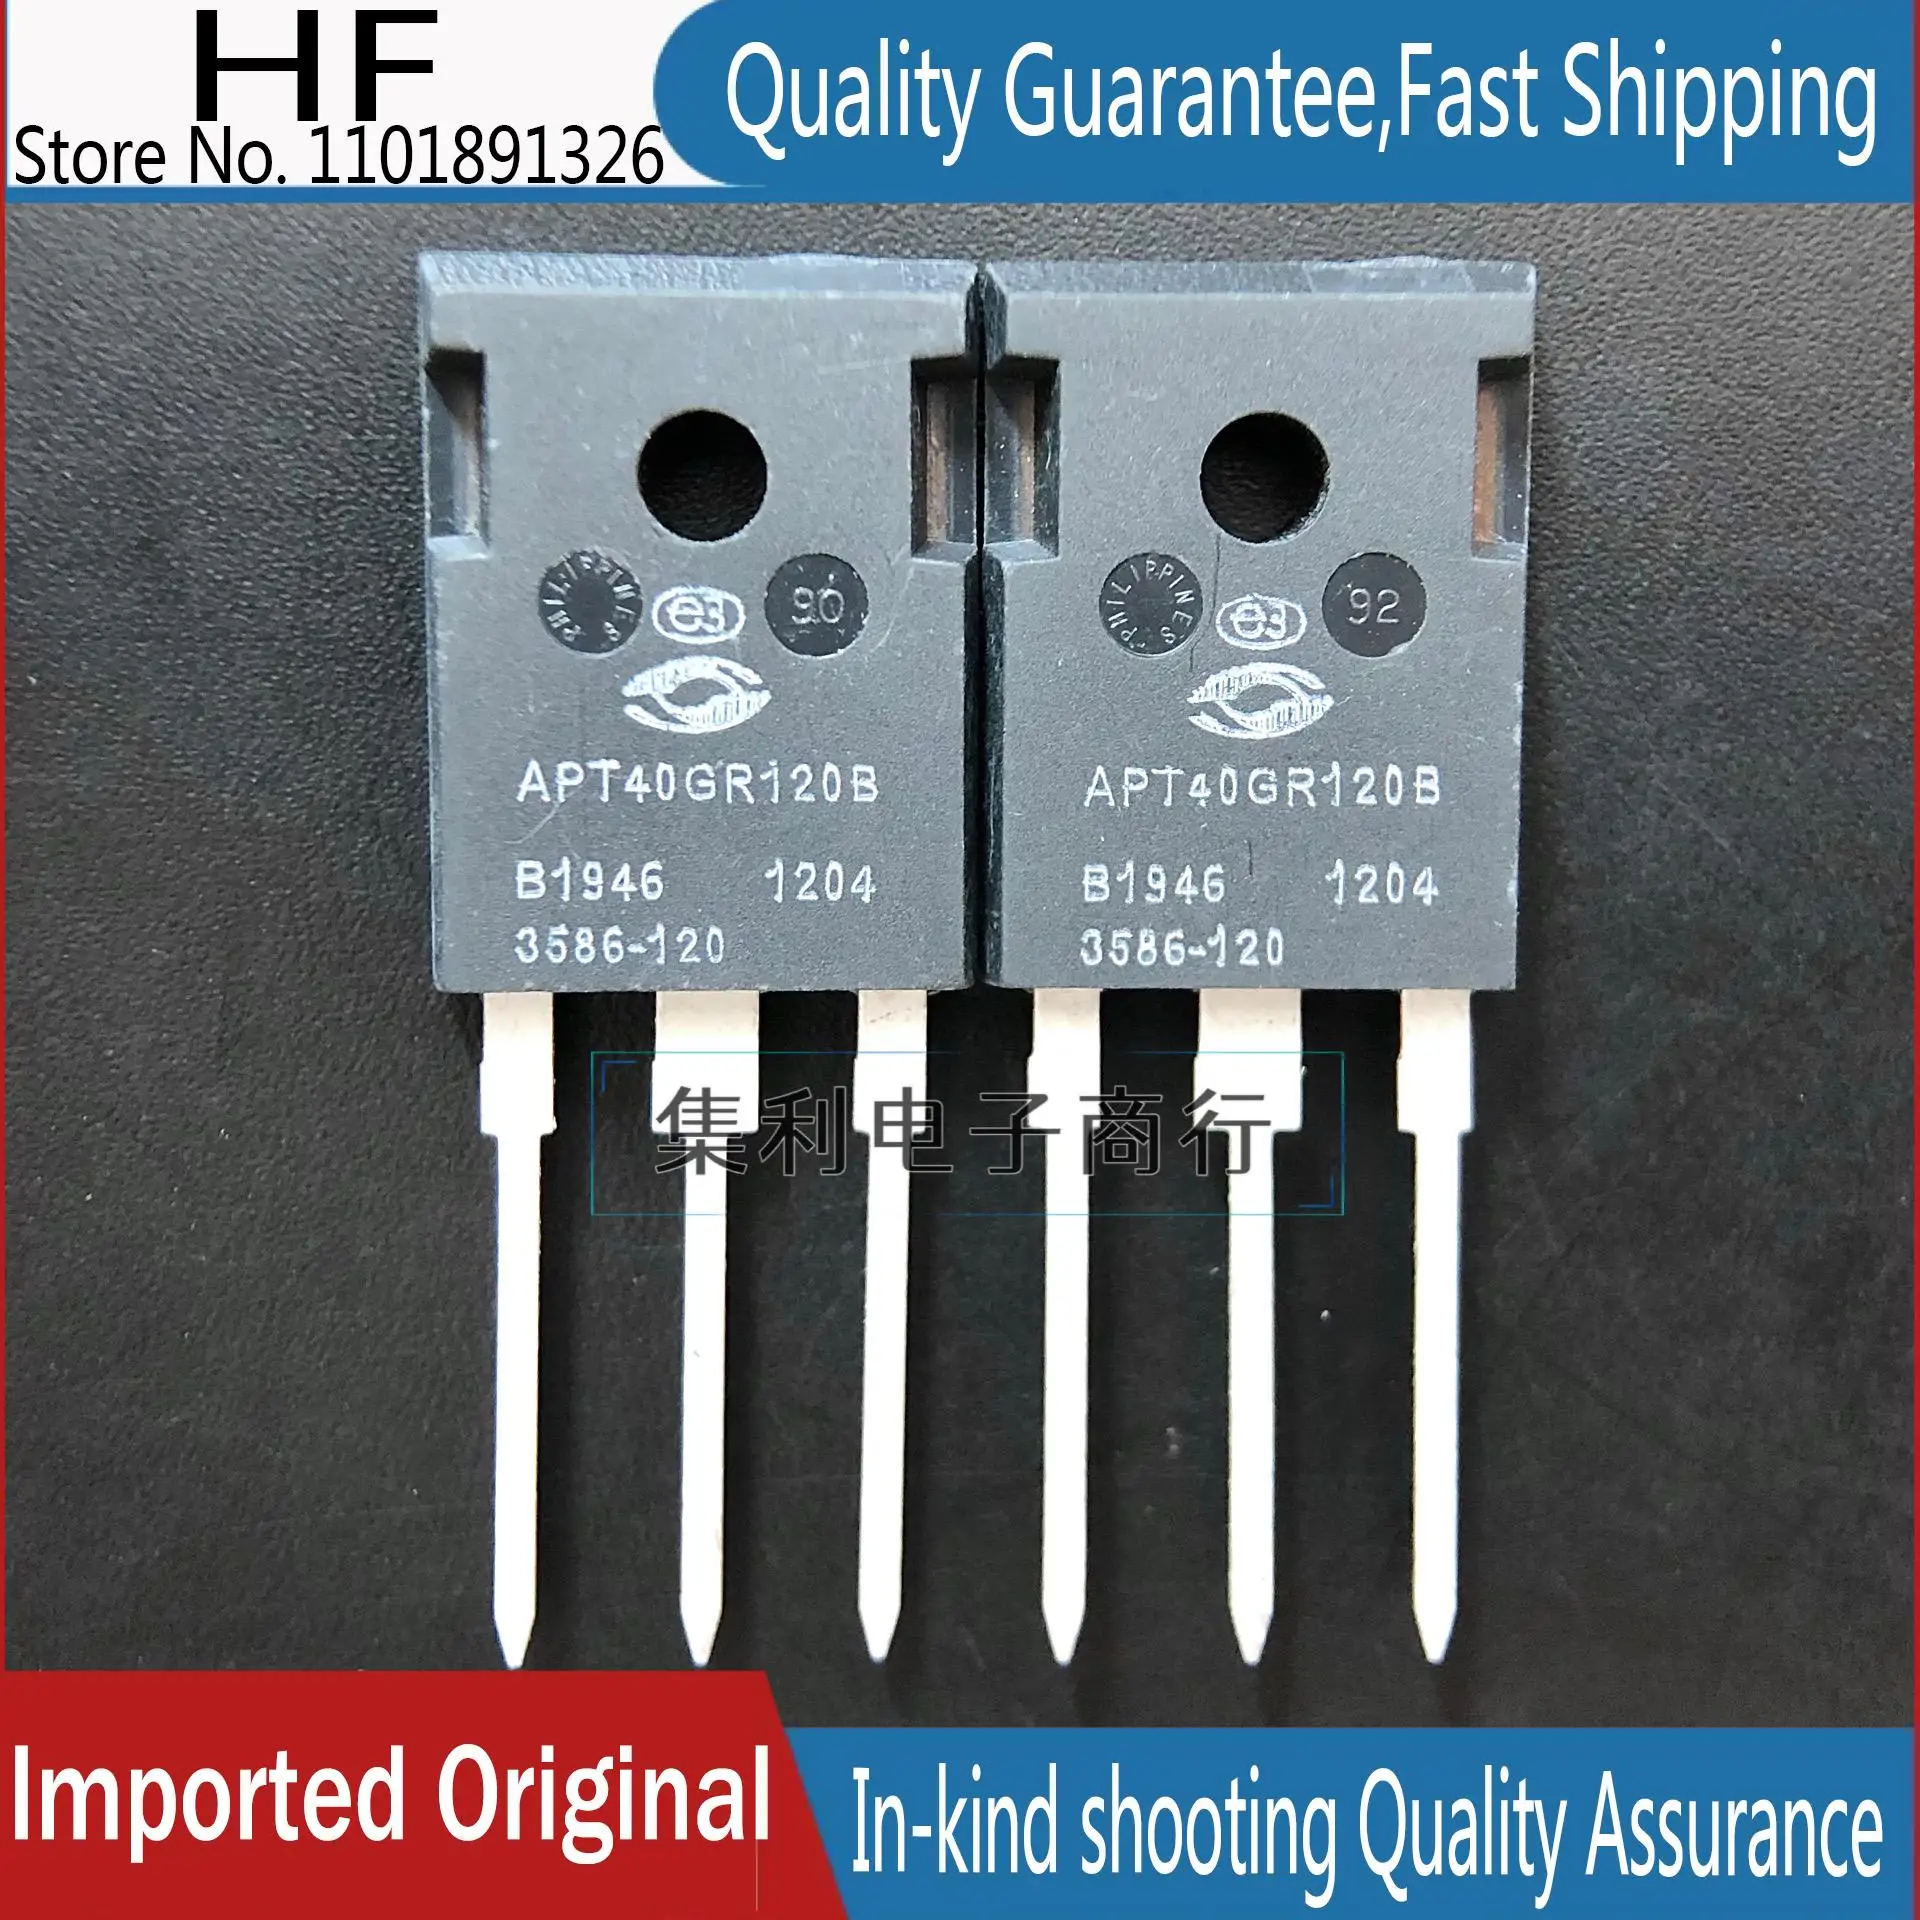 

10PCS/Lot APT40GR120B TO-247 IGBT 1200V 88A 500W Imported Original In Stock Fast Shipping Quality guarantee